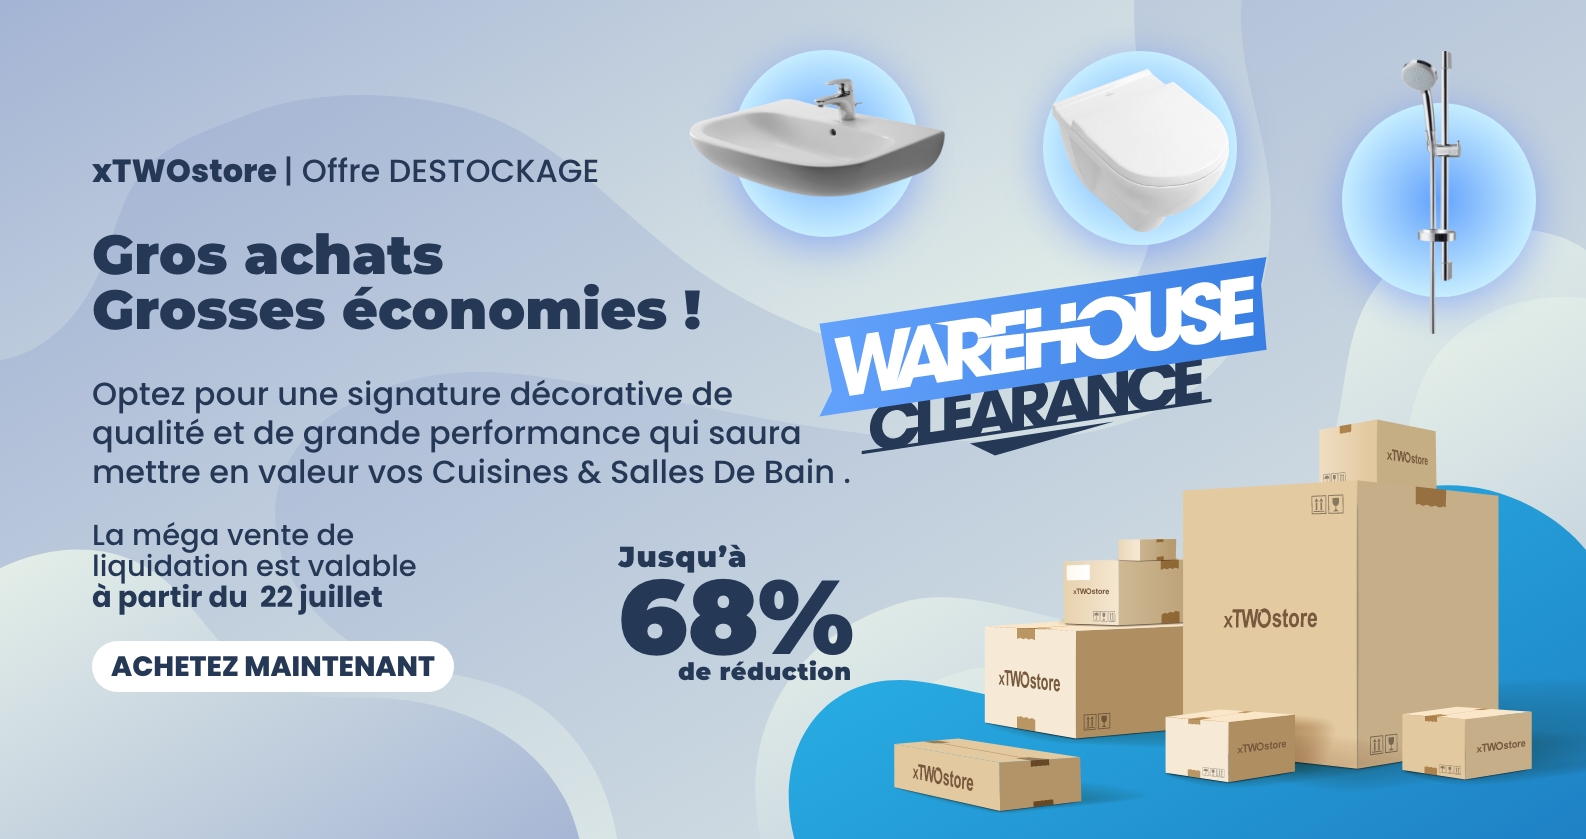 Warehouse Clearance Sale at xTWOstore